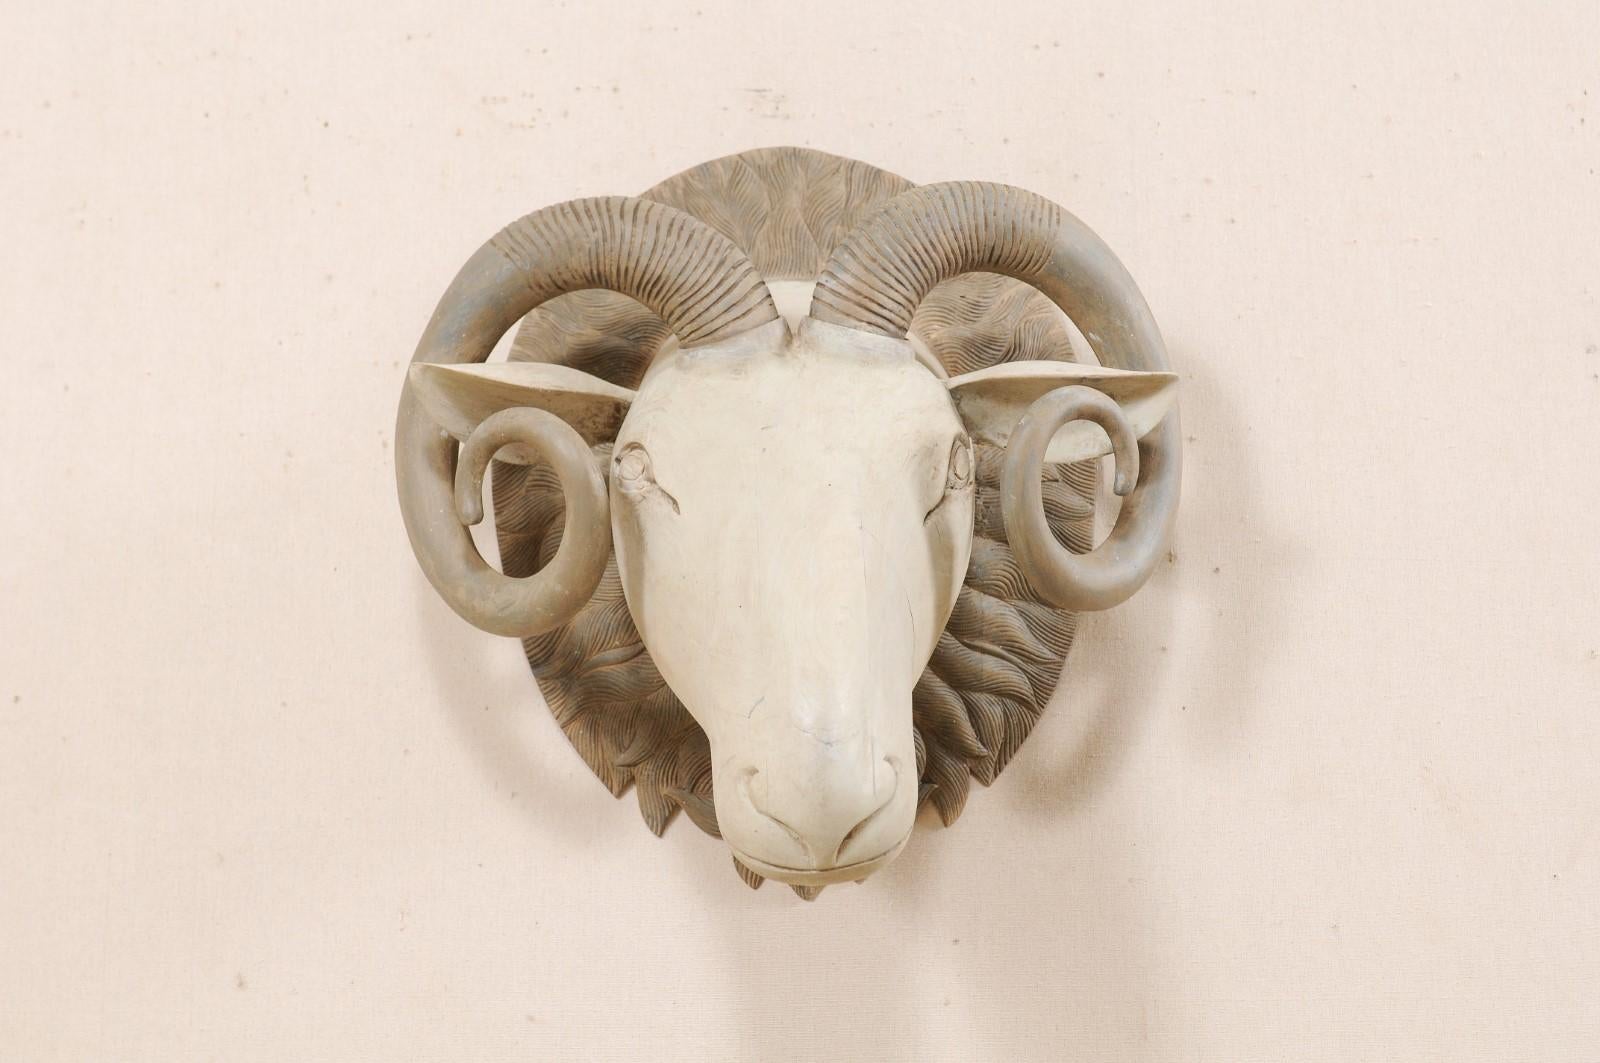 A handsome hand carved wooden ram's head wall ornament. This artisan created wooden ram's head features a hand carved, forward facing three-dimensional ram face with beautifully curled and textured horns, mounted onto a rounded wooden back plate